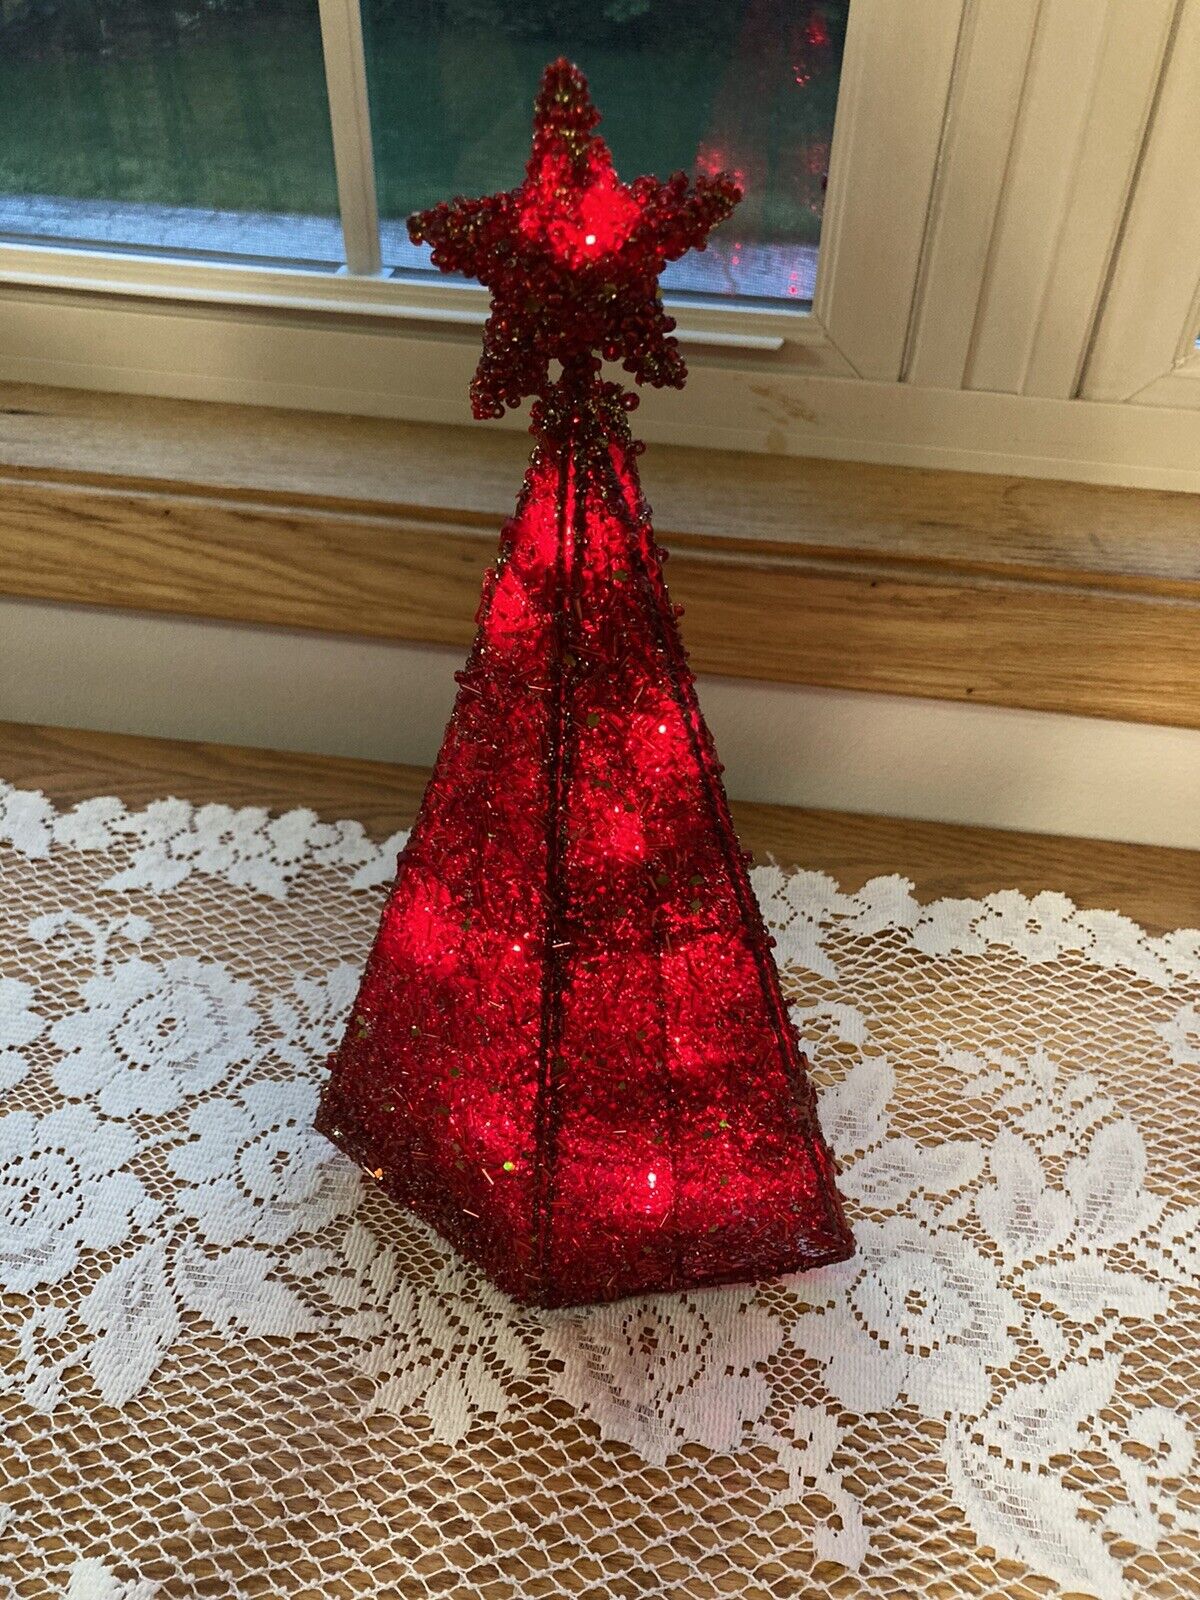 Avon Majestic Lighted Tree - New In Box  Complete With Batteries Sparkling Red